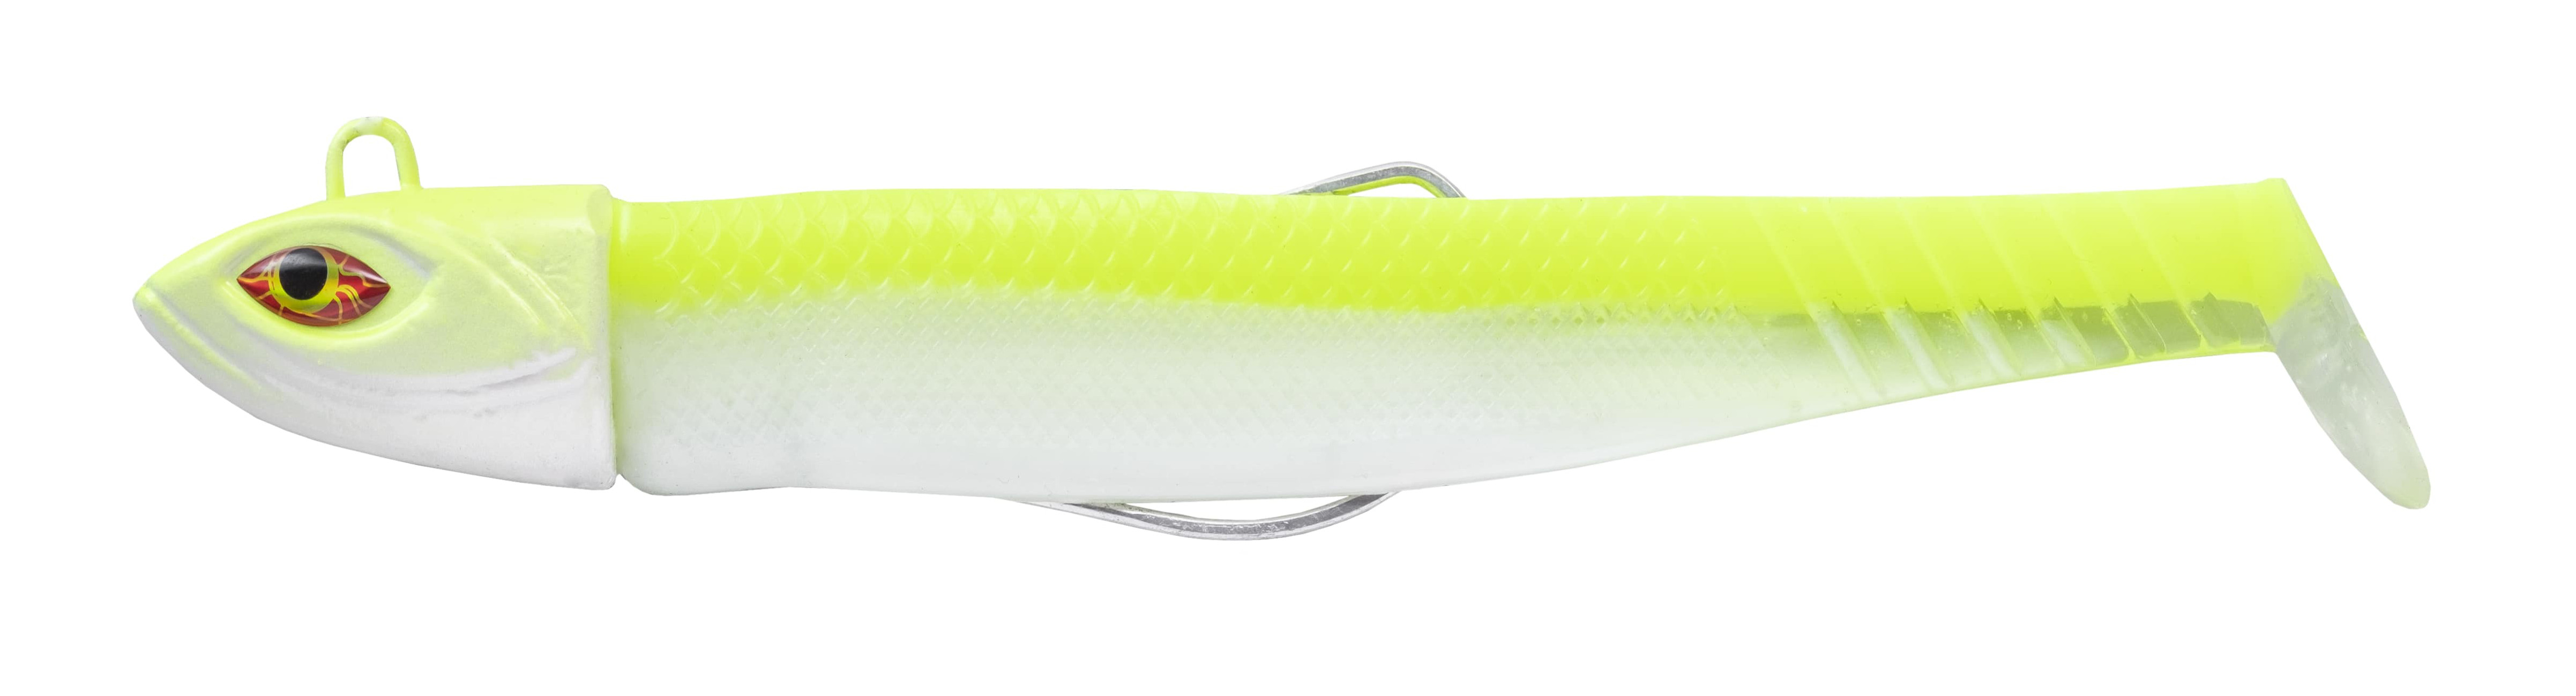 Cinnetic Crafty Candy Shad 17cm (125g) (2 Stück) - White Chartreuse